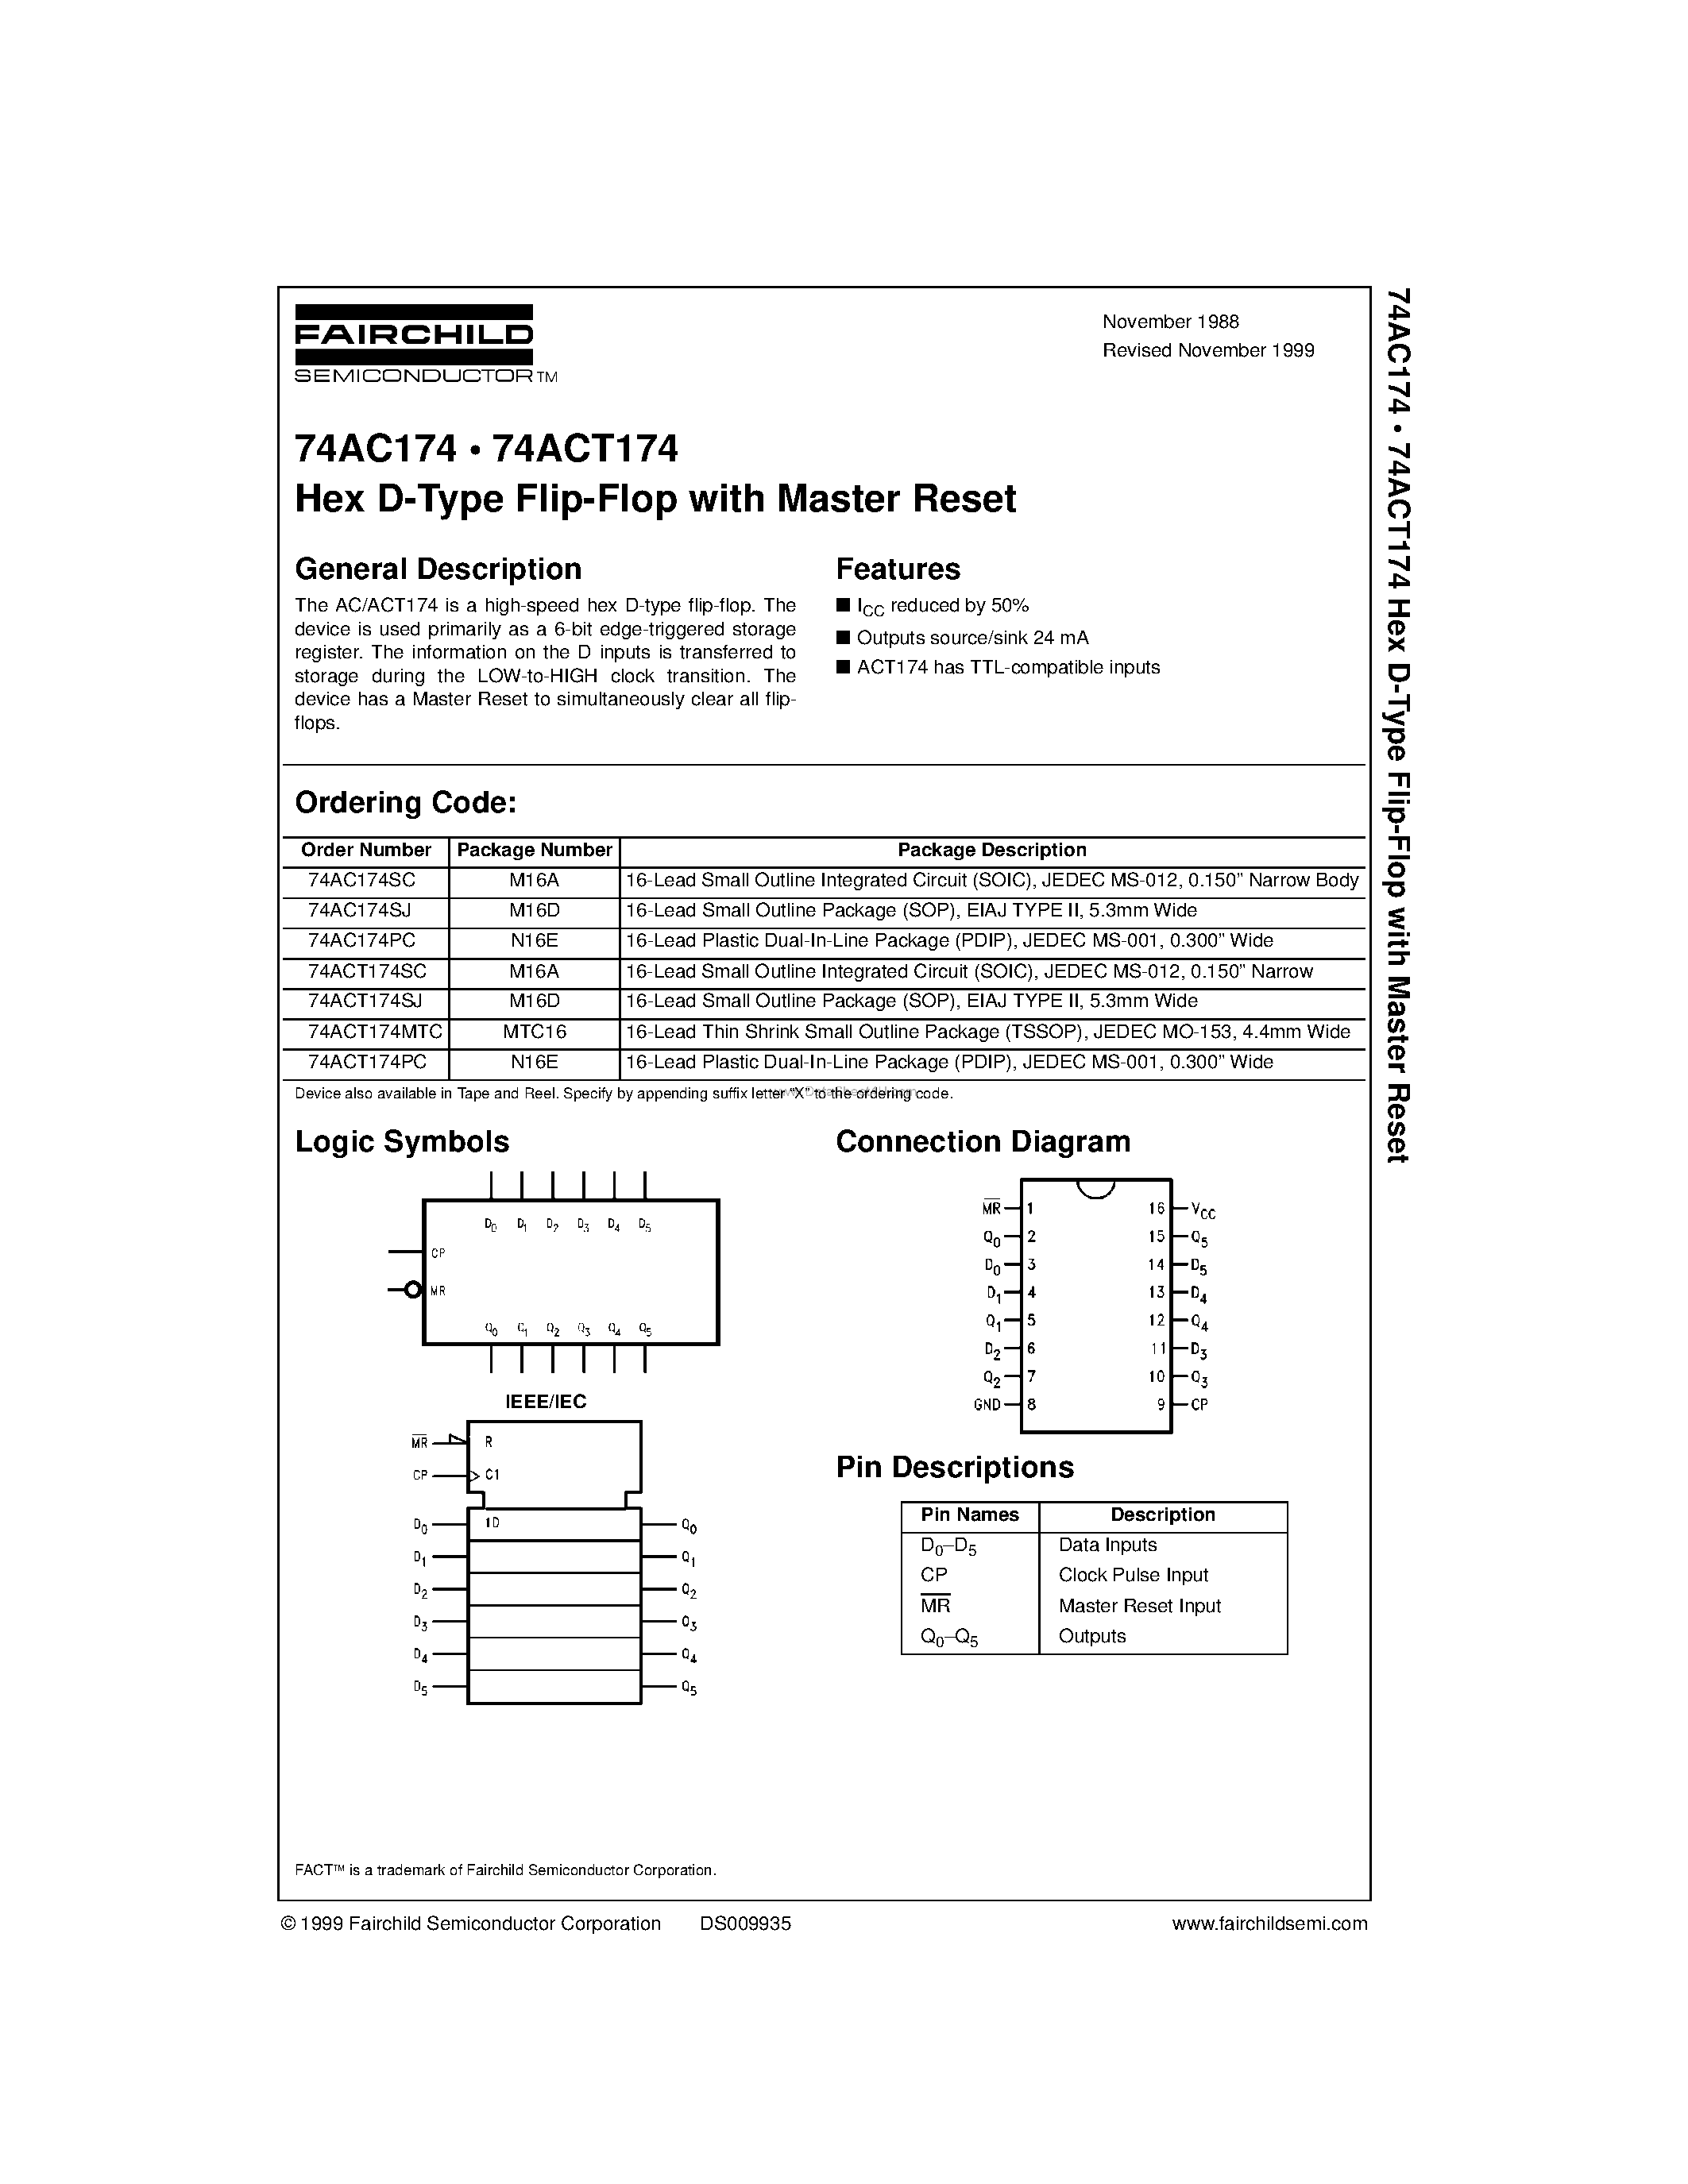 Datasheet 74AC174SJ - Hex D-Type Flip-Flop with Master Reset page 1